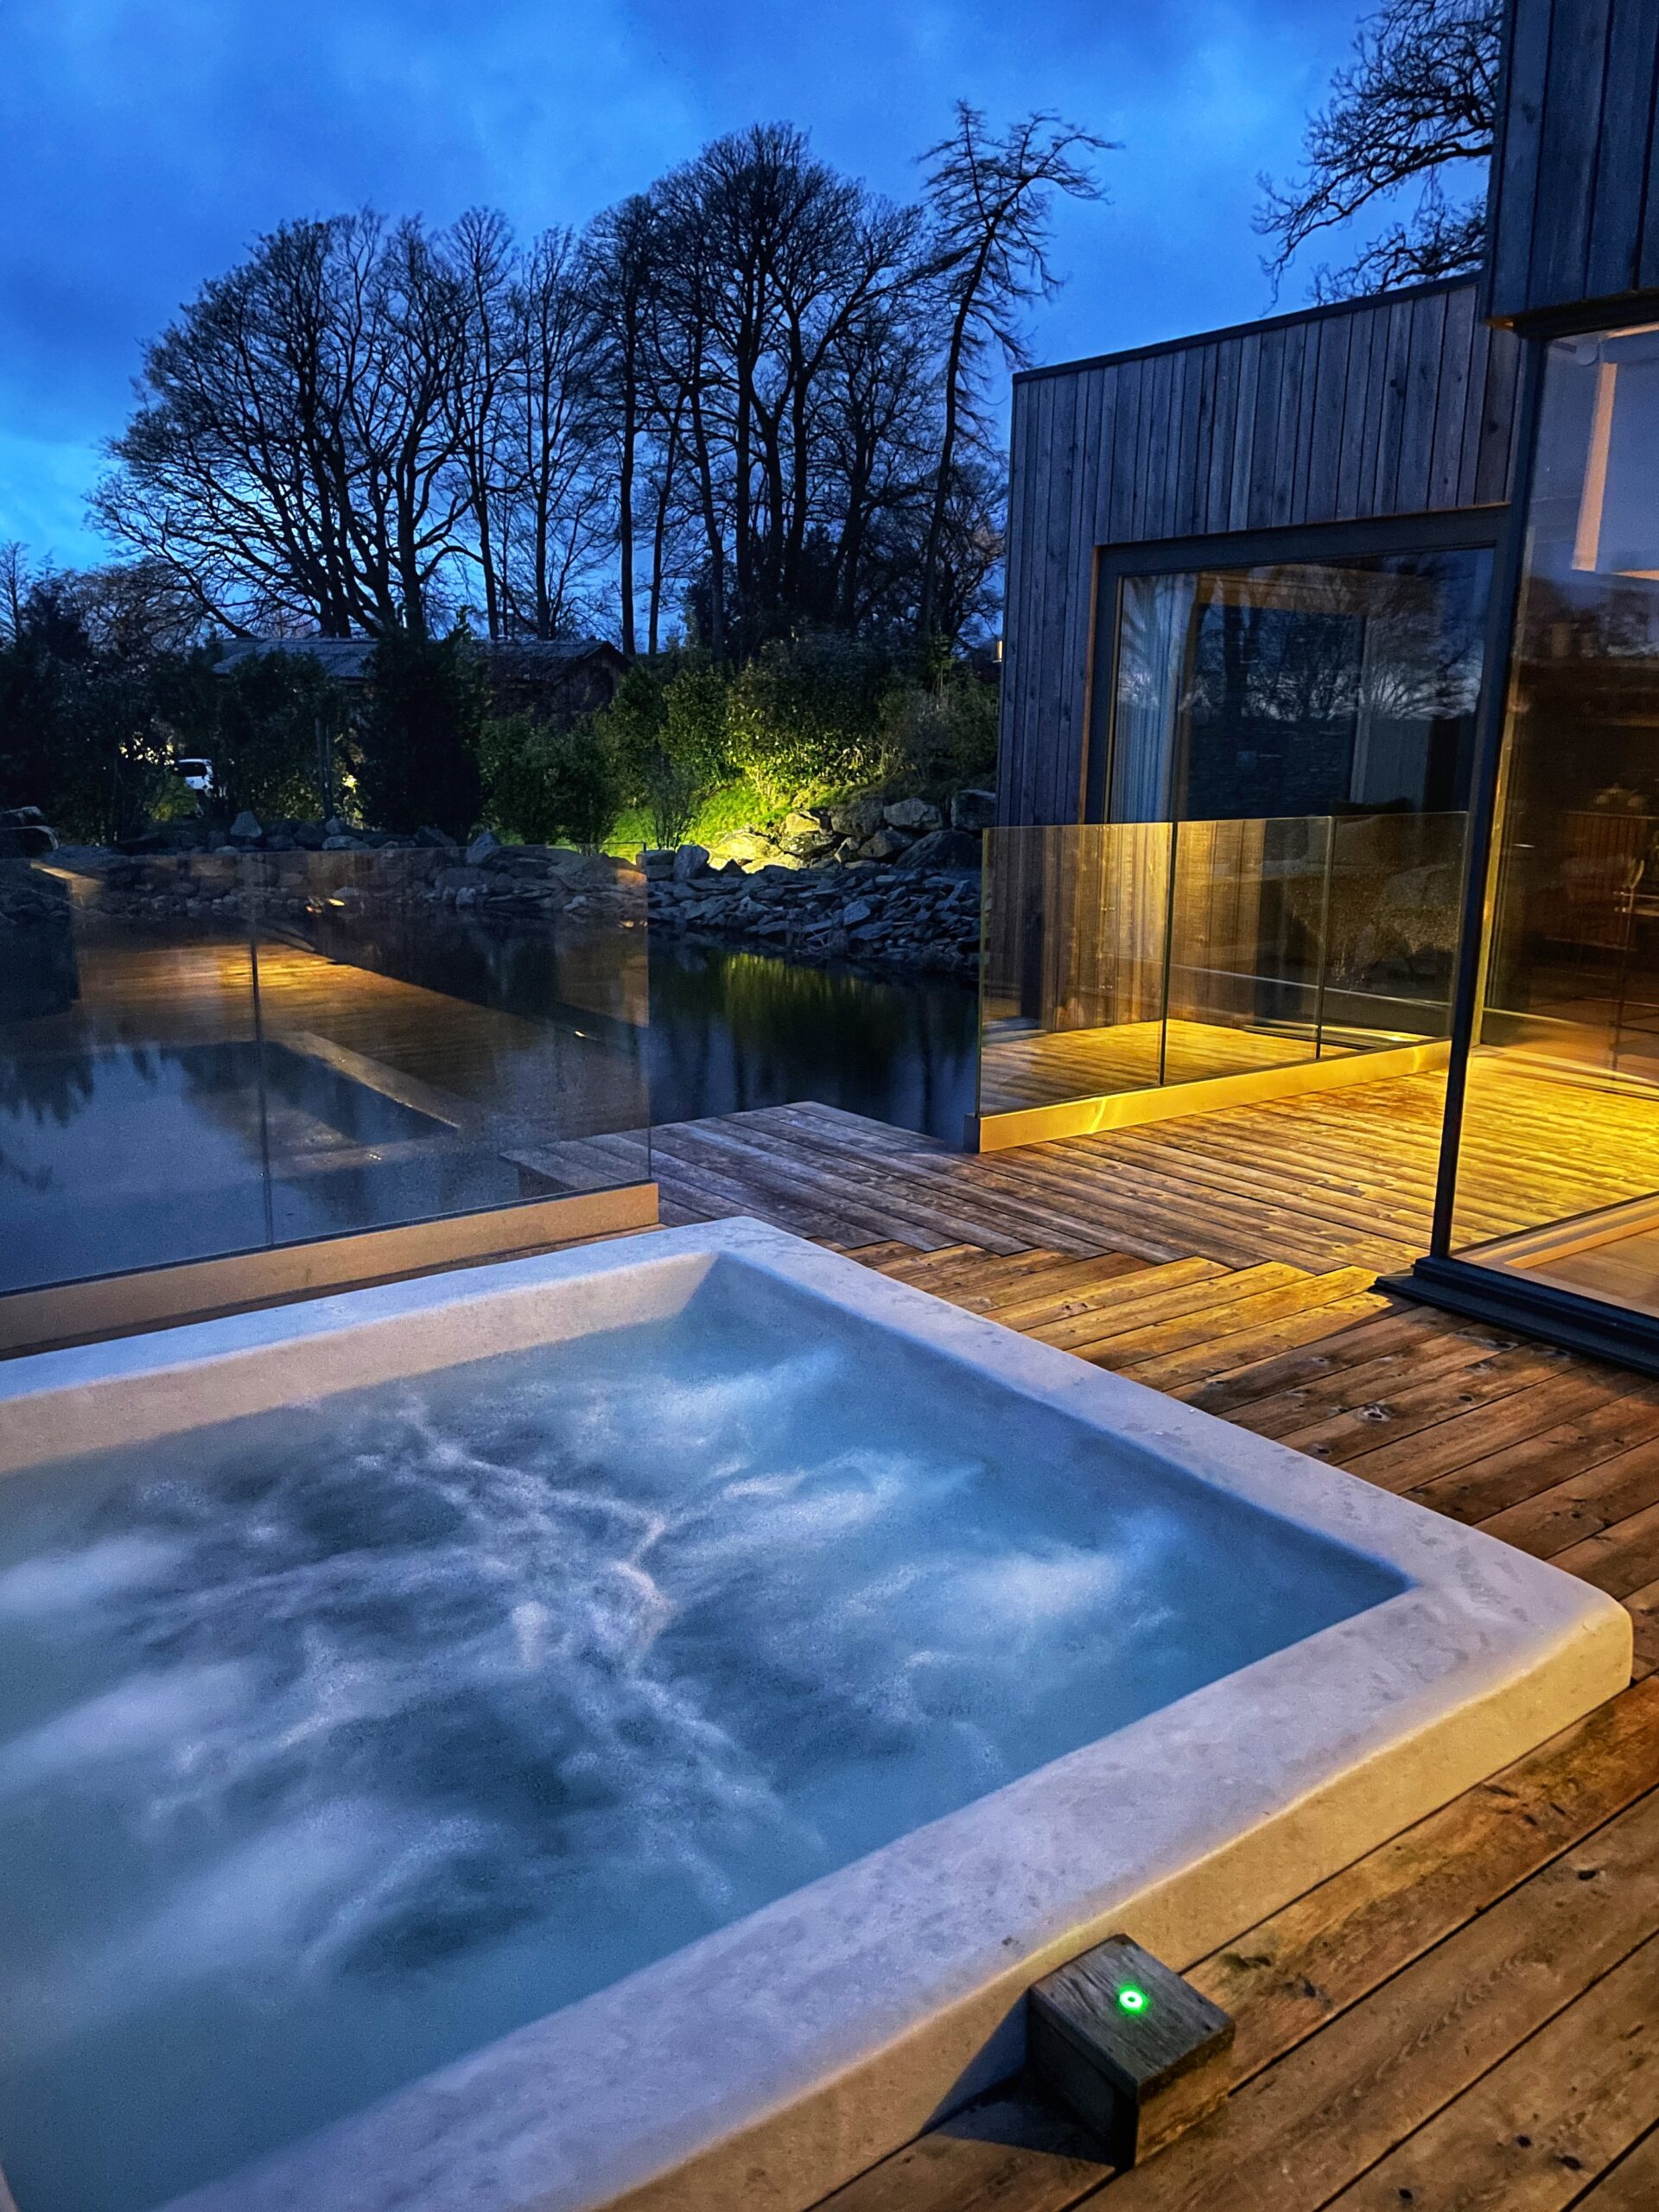 Spa Suites at The Gilpin have their own hot tubs on the decking. Credit: The Manc Group